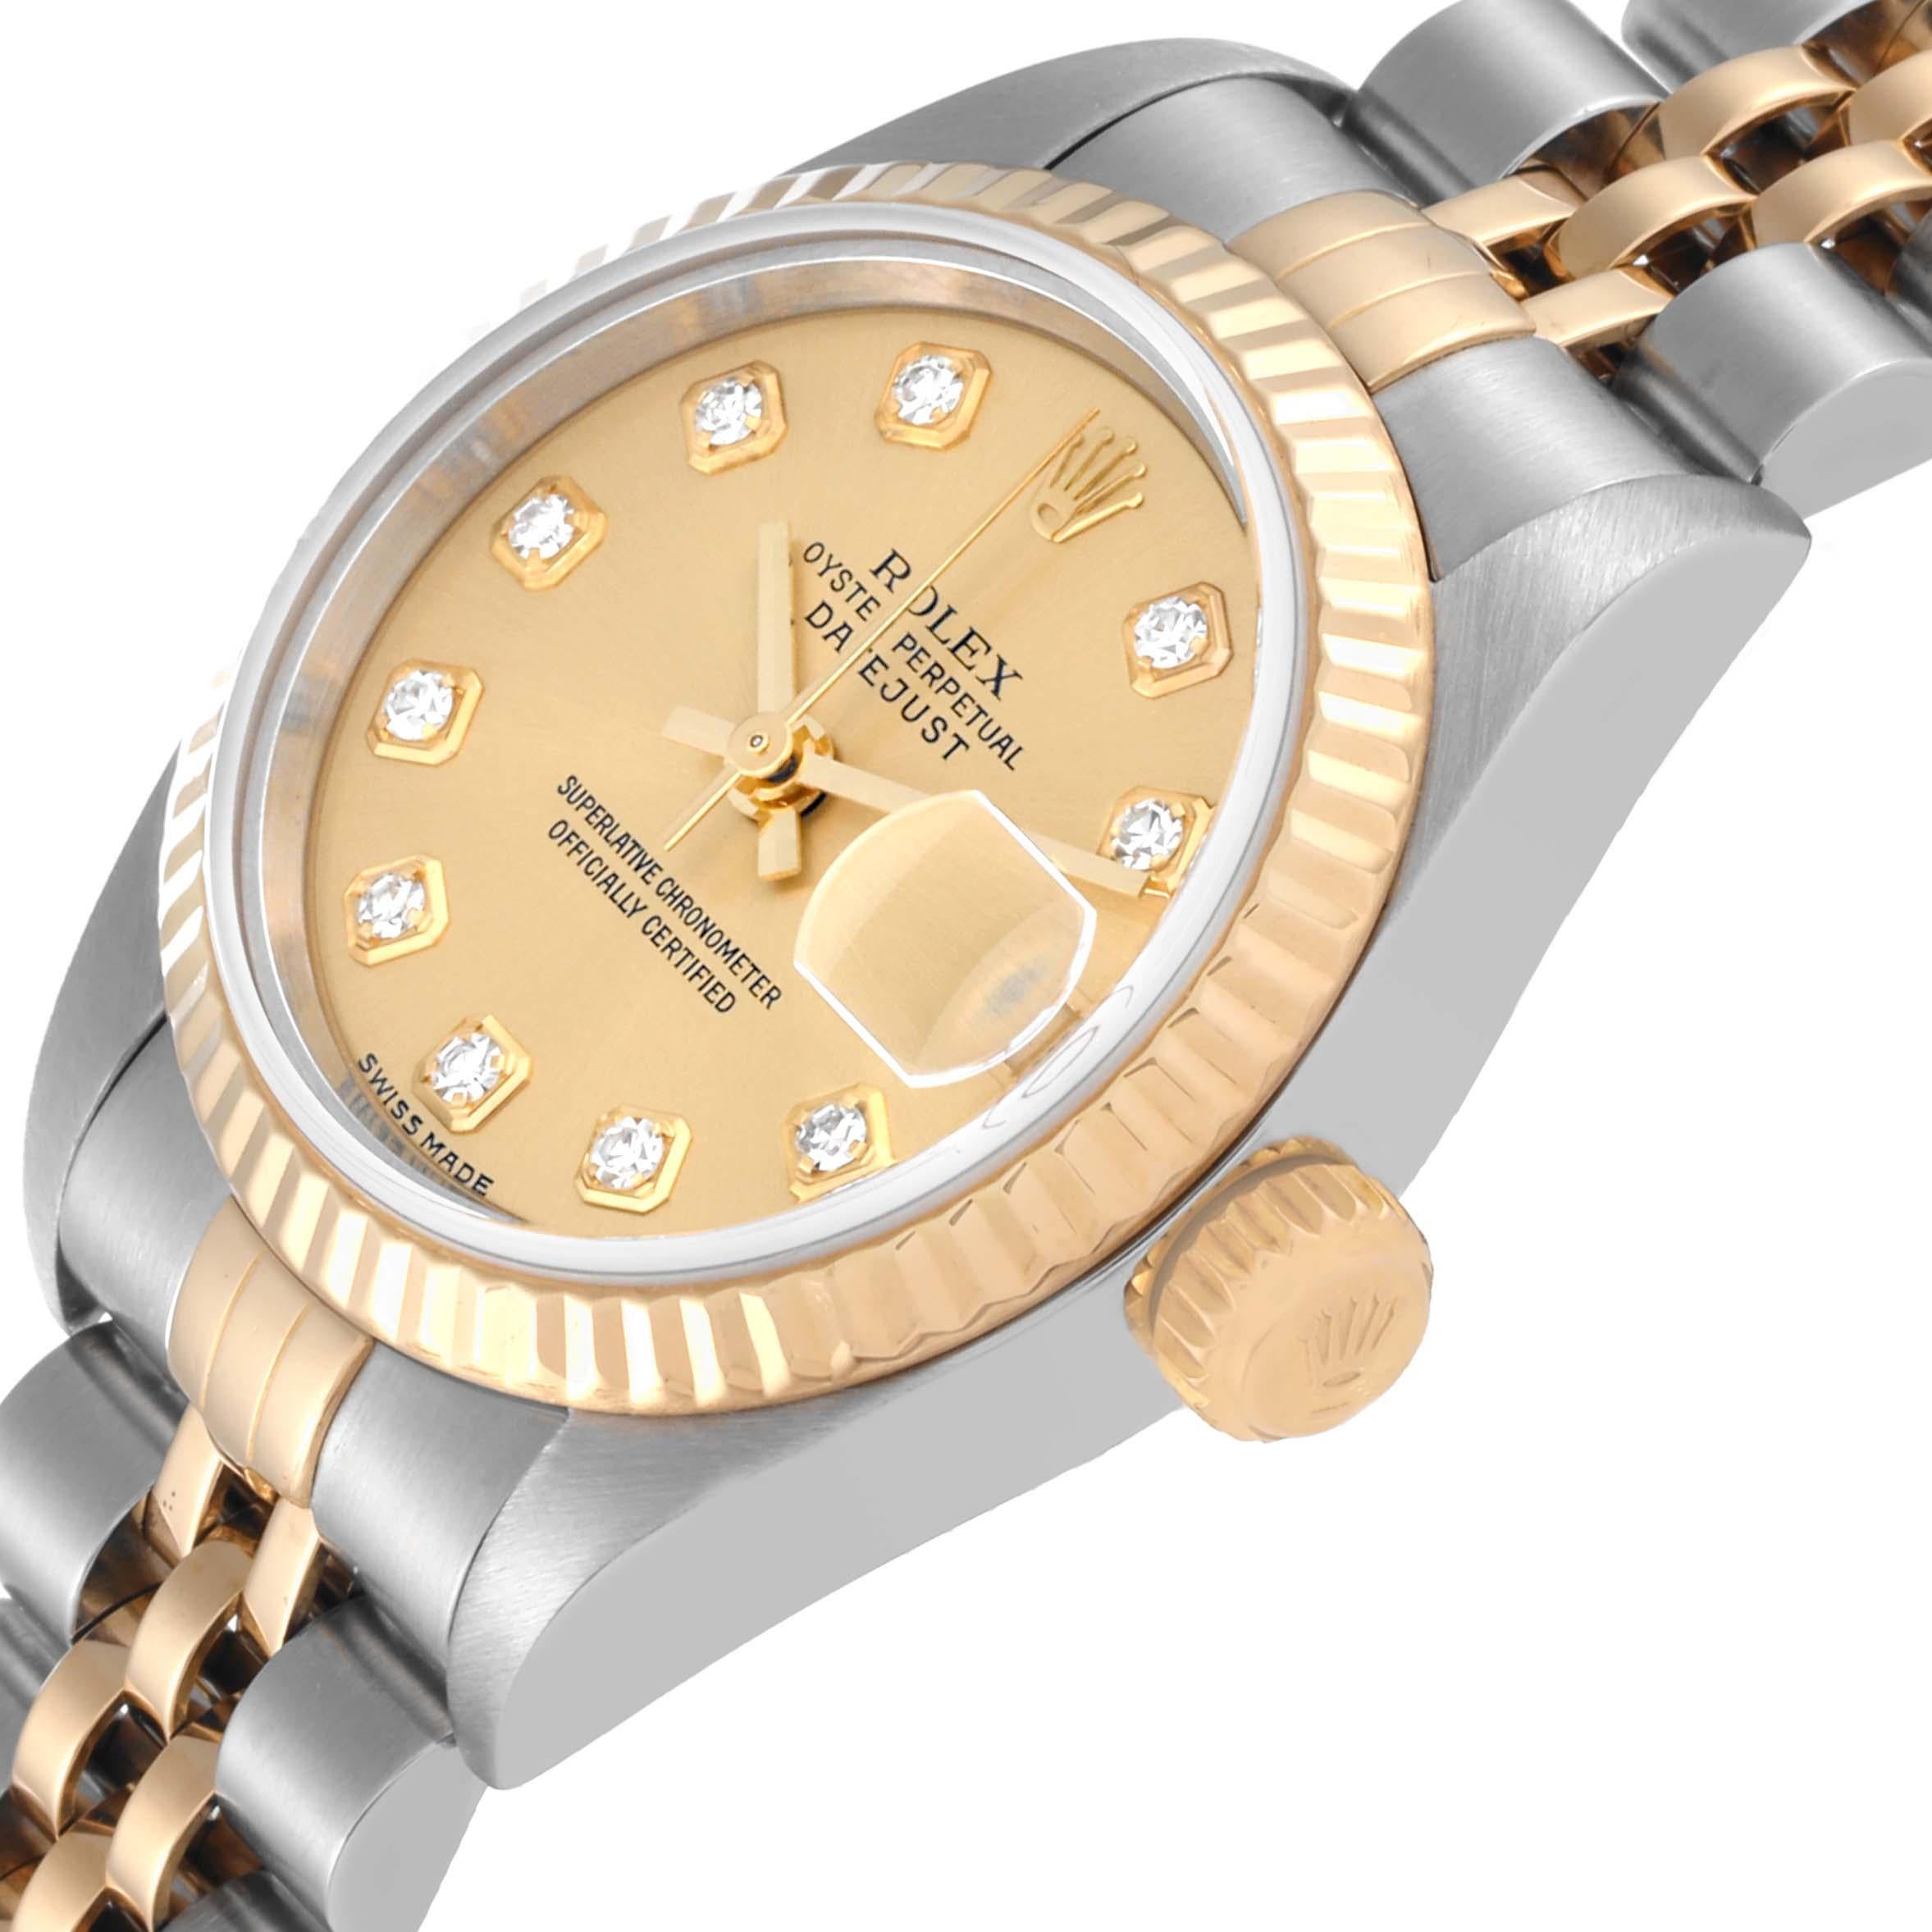 Rolex Datejust Steel Yellow Gold Champagne Diamond Dial Ladies Watch 79173 For Sale 4